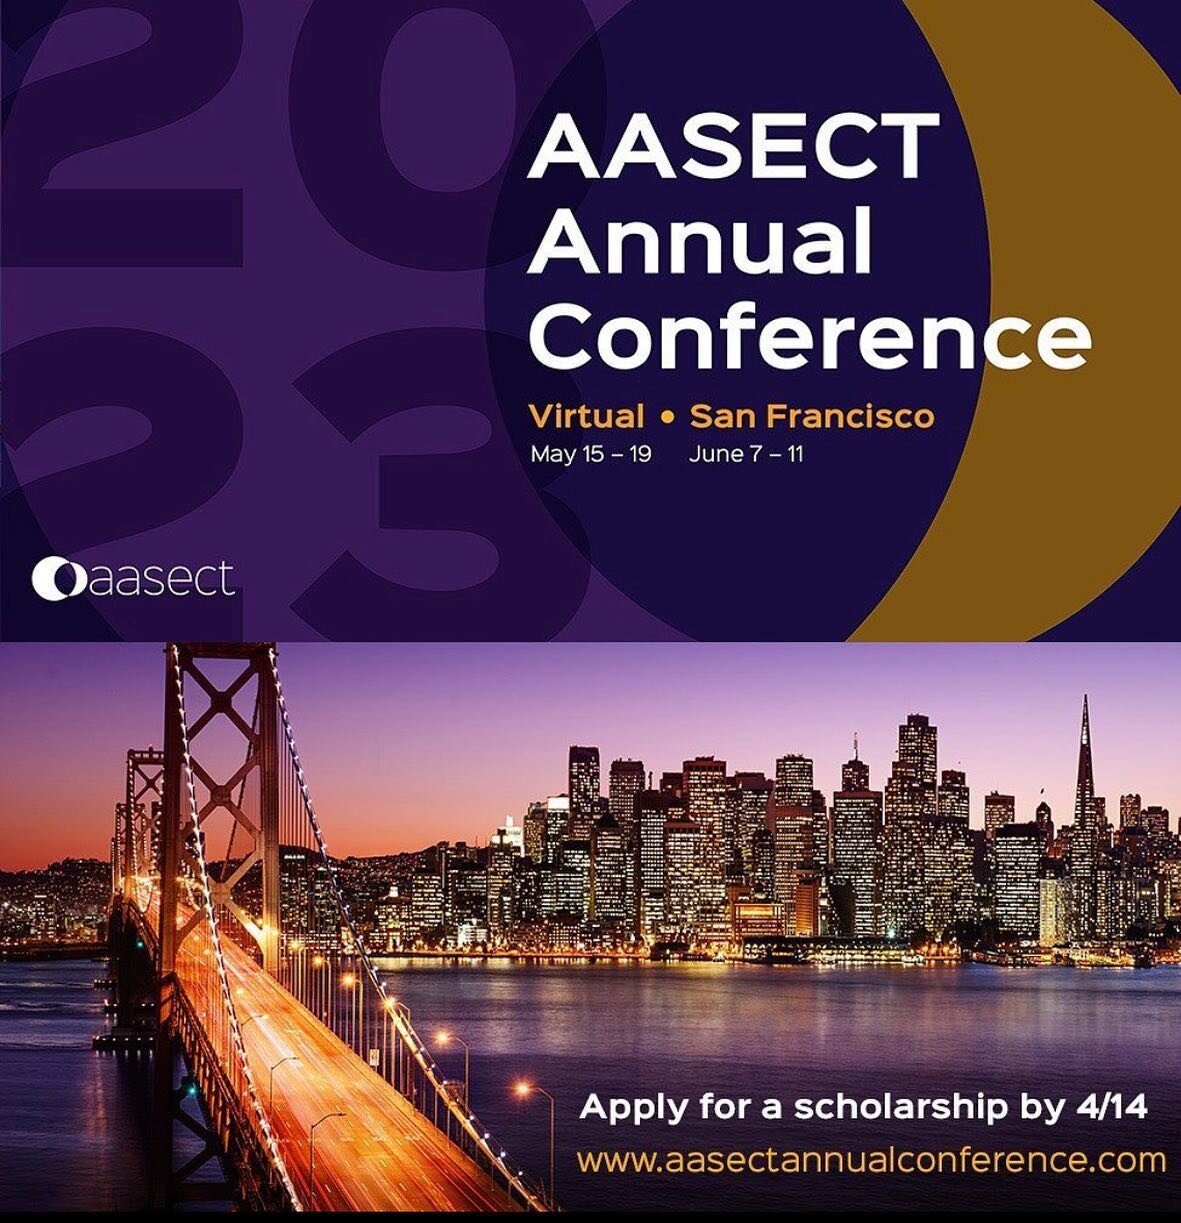 Heading to San Francisco for the annual AASECT (American association for sexuality educators, counselors, and therapists) in June! Cannot wait to not only experience this conference for the first time, but to also connect with  colleagues, meet new p